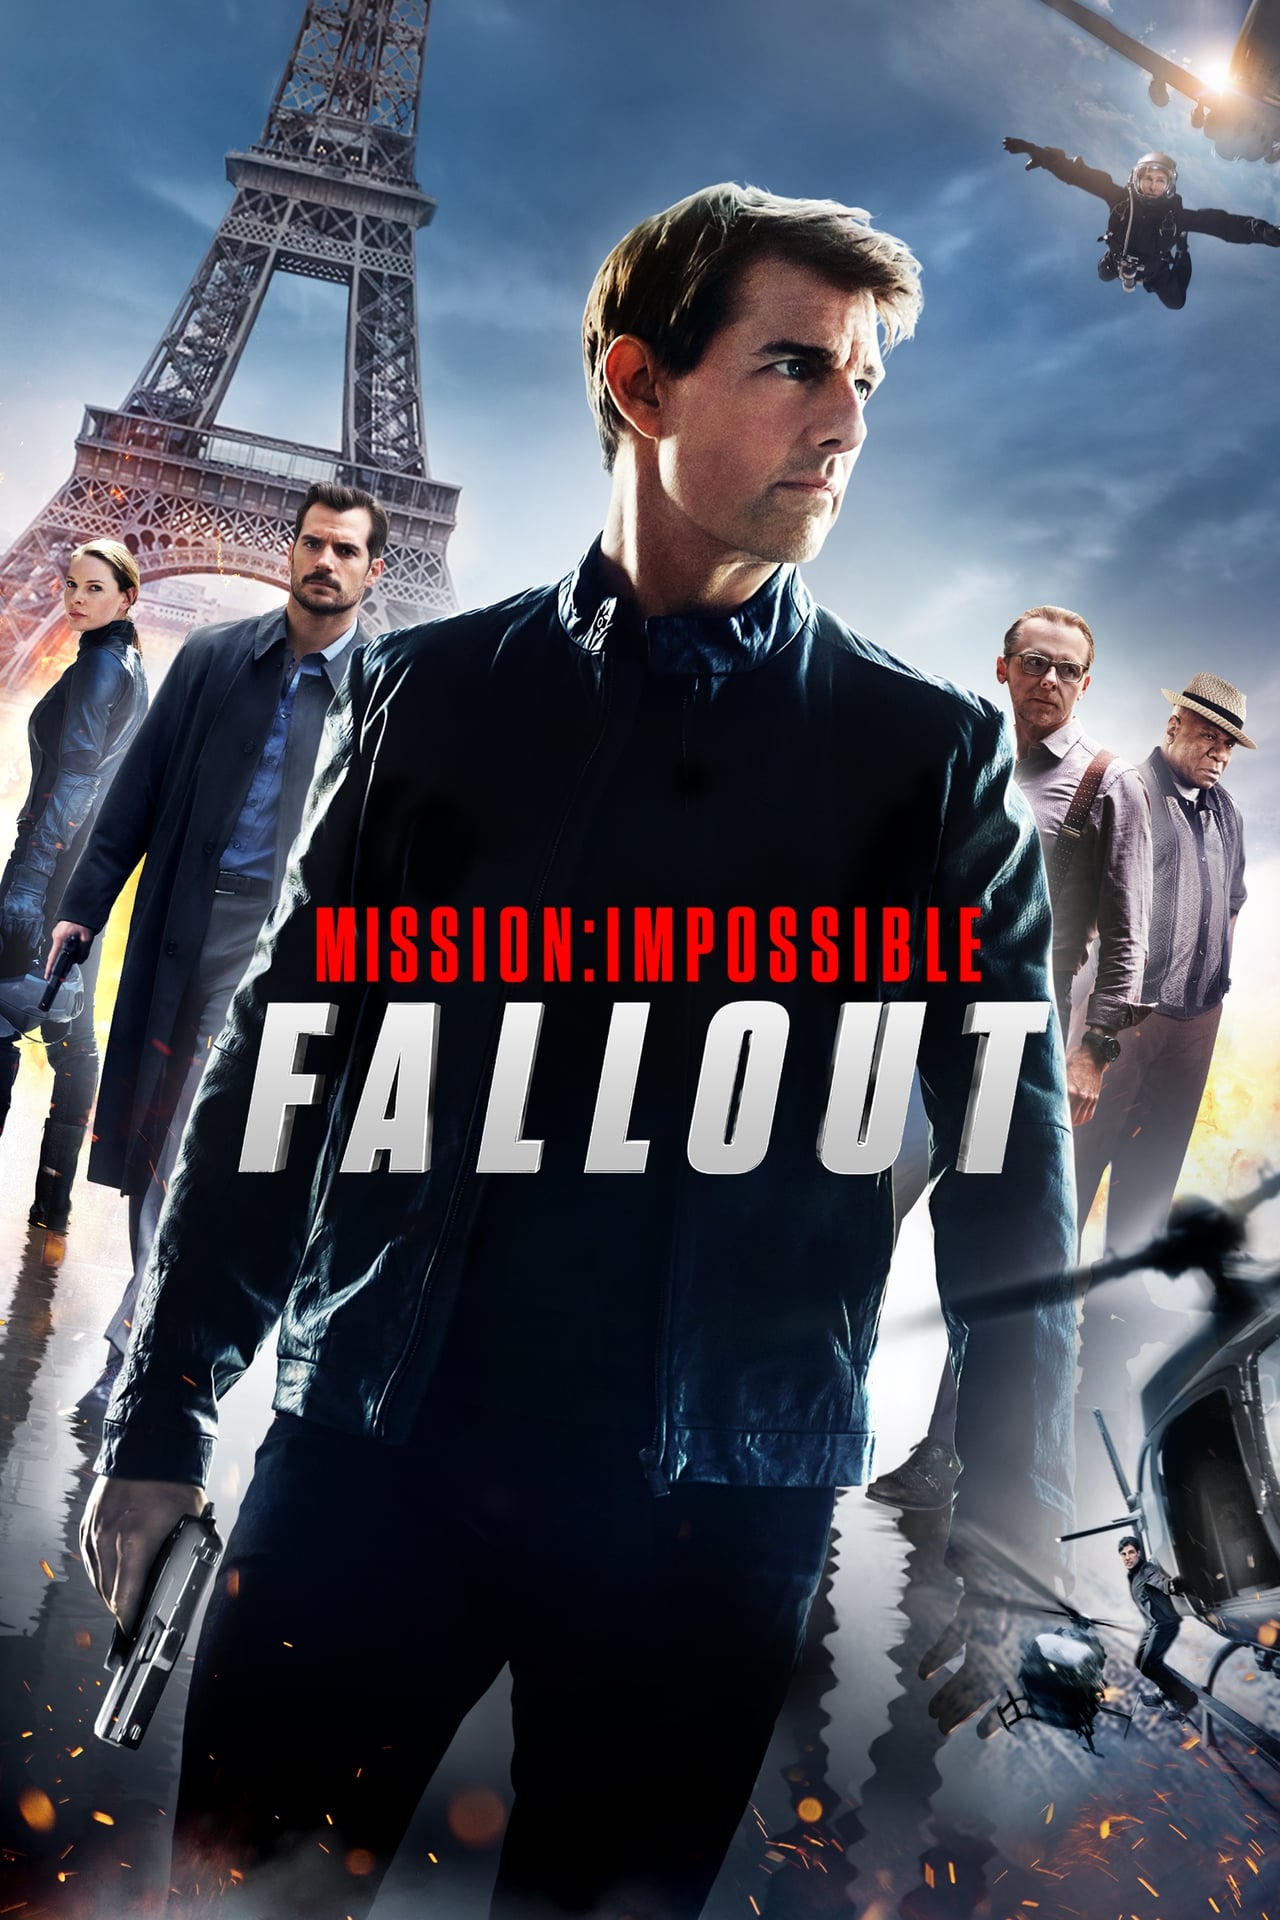 Mission Impossible Fallout Movie Synopsis, Summary, Plot & Film Details